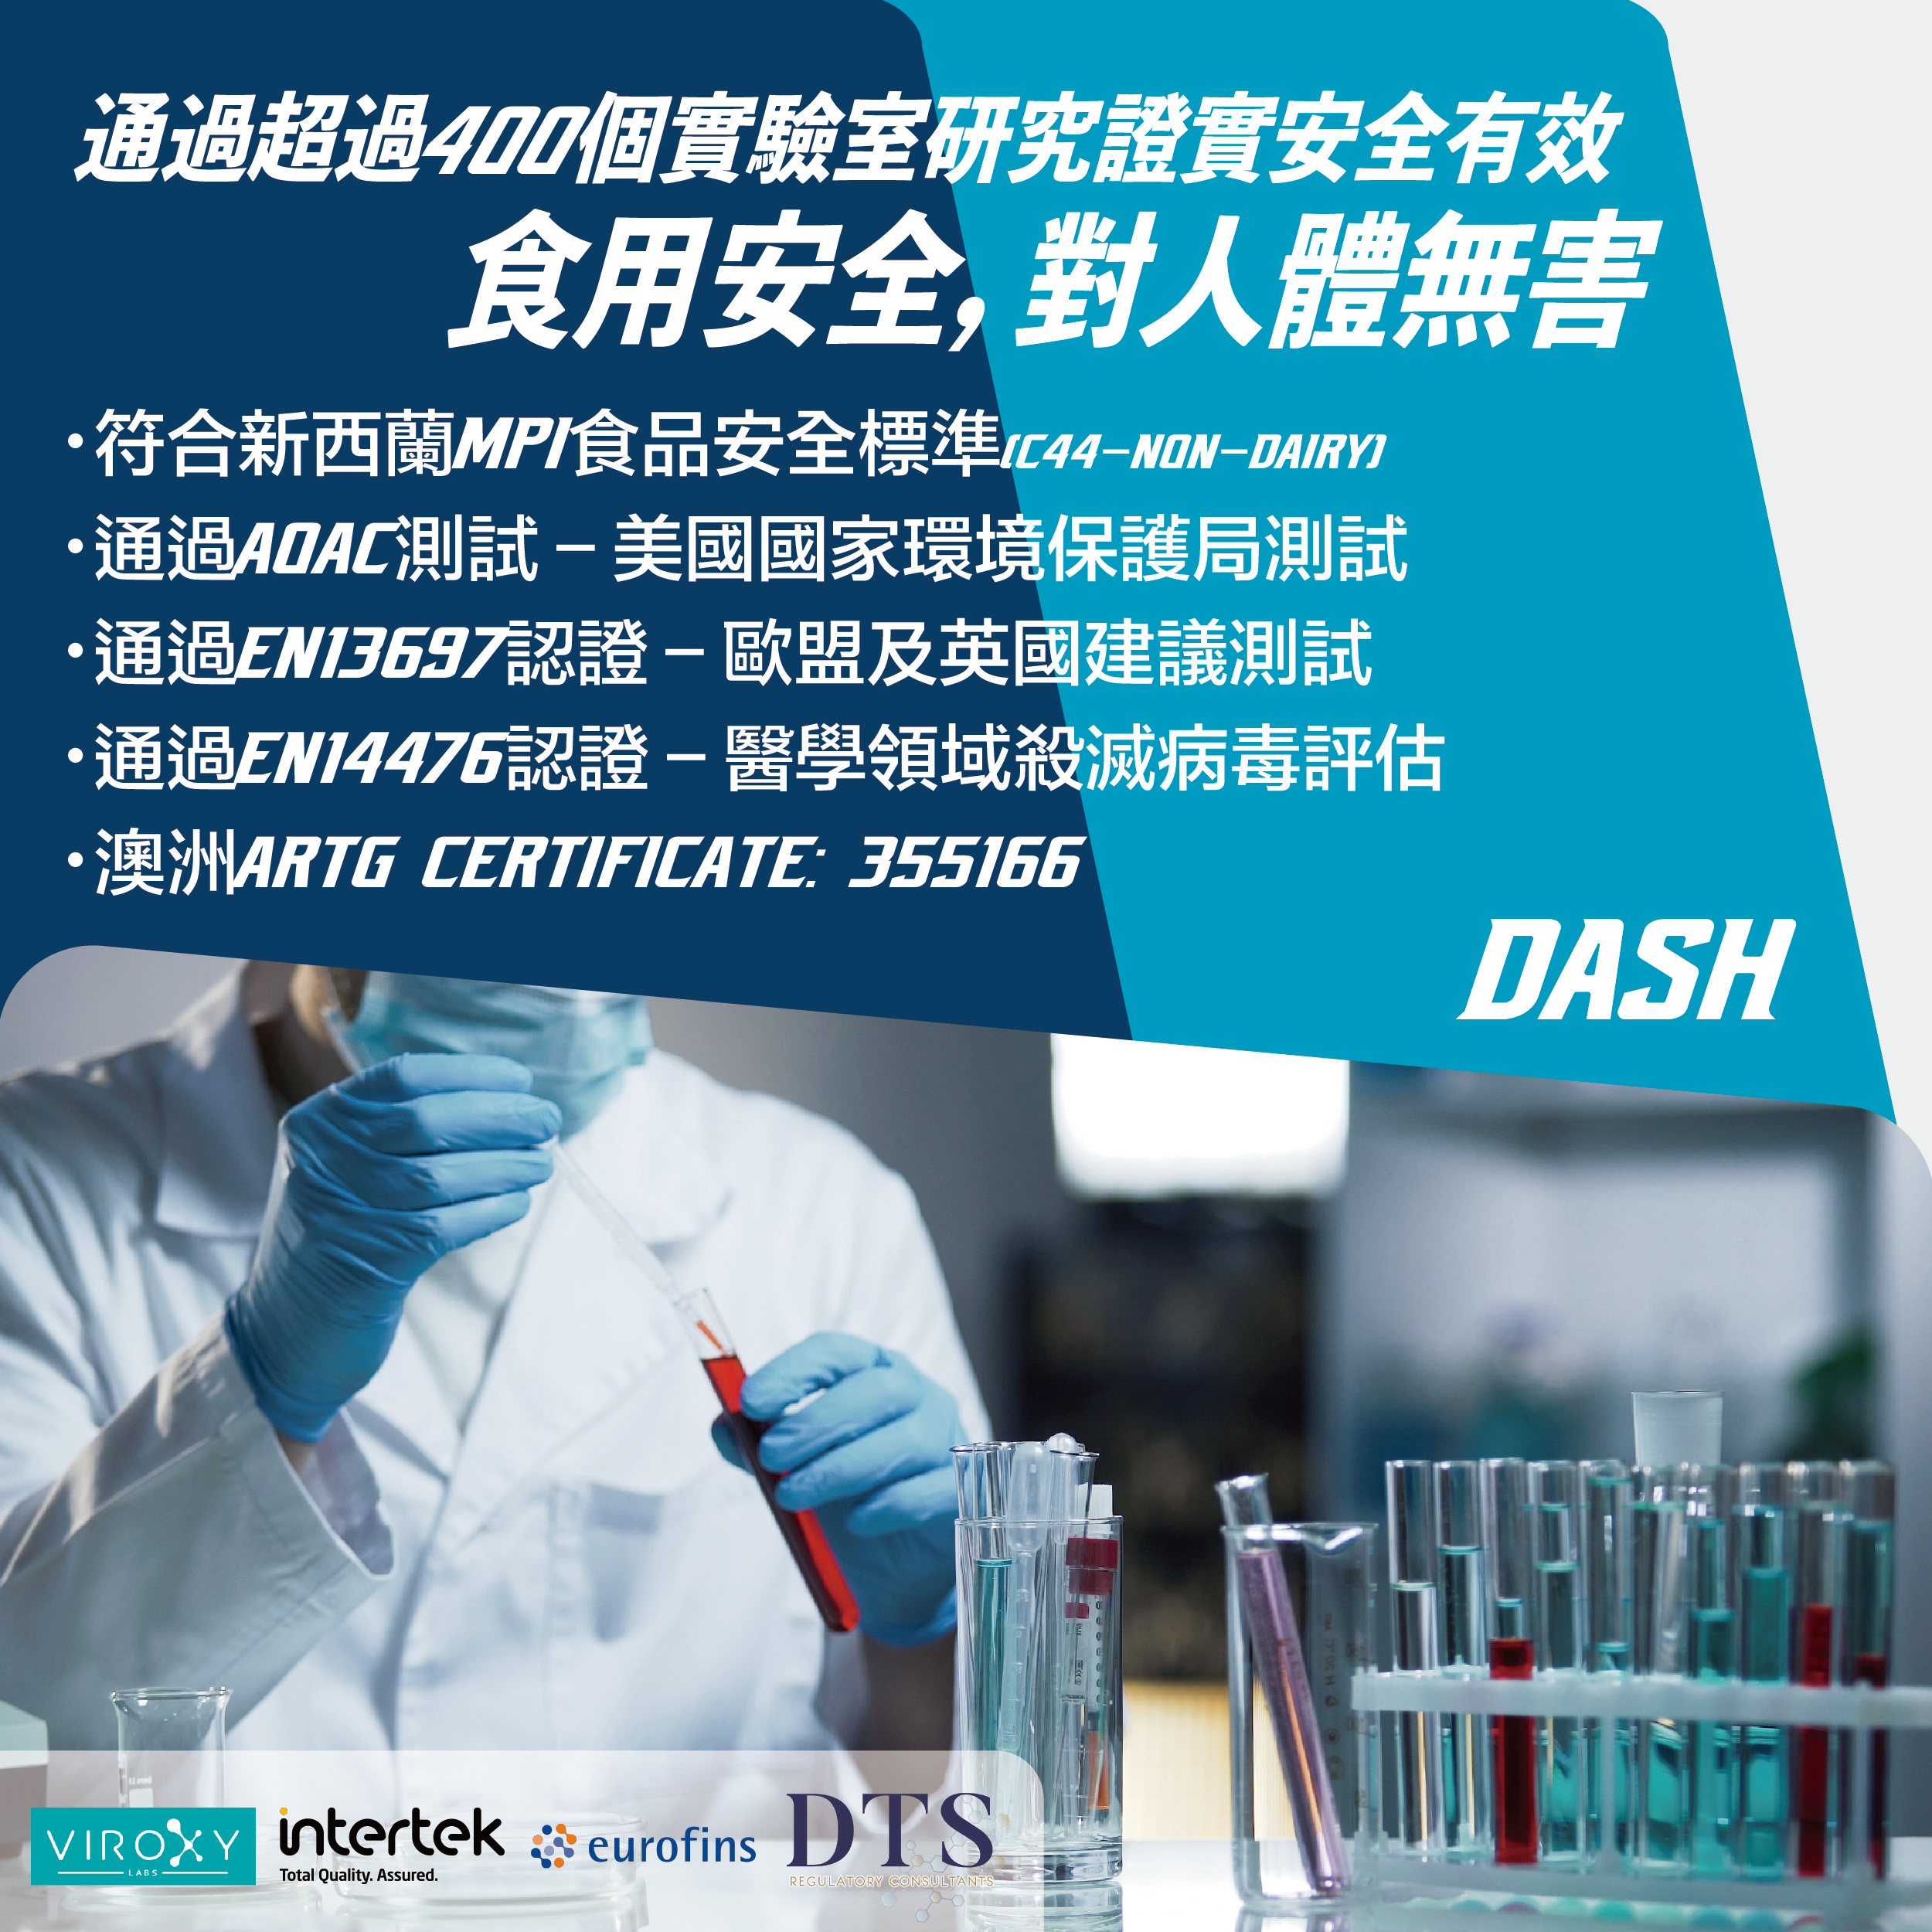 DASH-30 Guard [Selected by Boeing and Airbus] Hospital Grade Antibacterial Disinfectant Coating Disinfectant (5L)